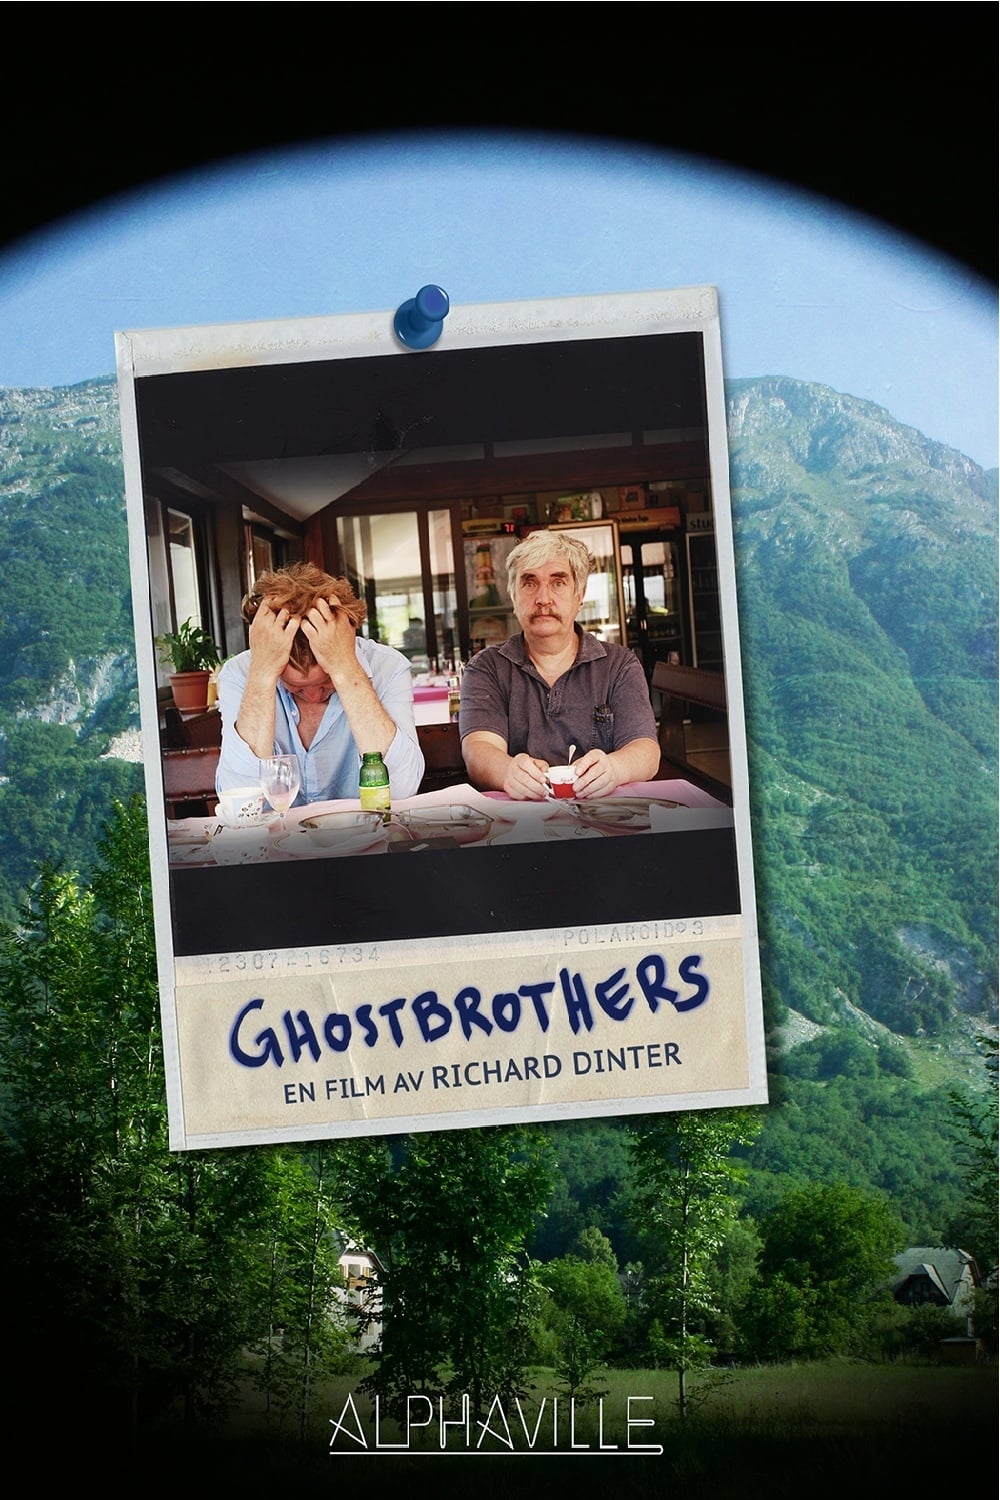 Ghostbrothers